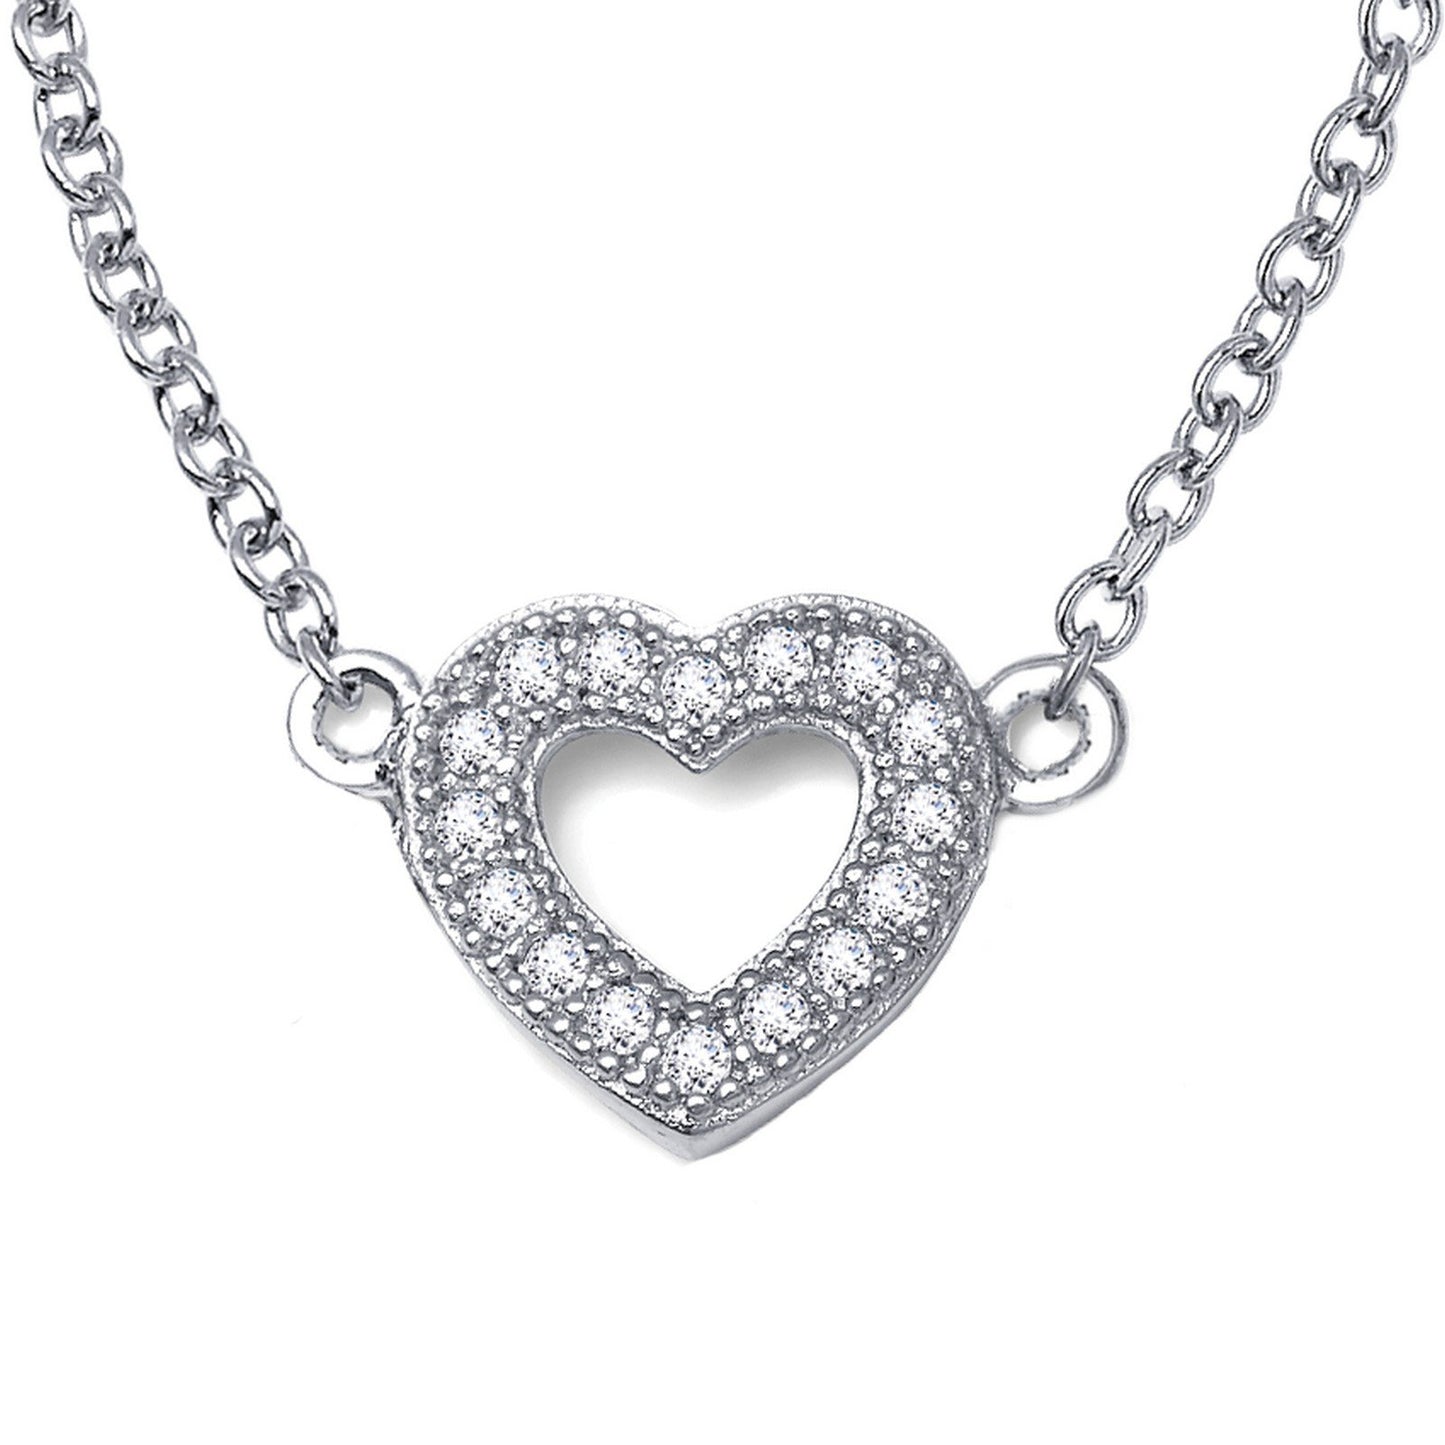 LaFonn Platinum Simulated Diamond N/A ANKLETS Sweet Open Heart Anklet